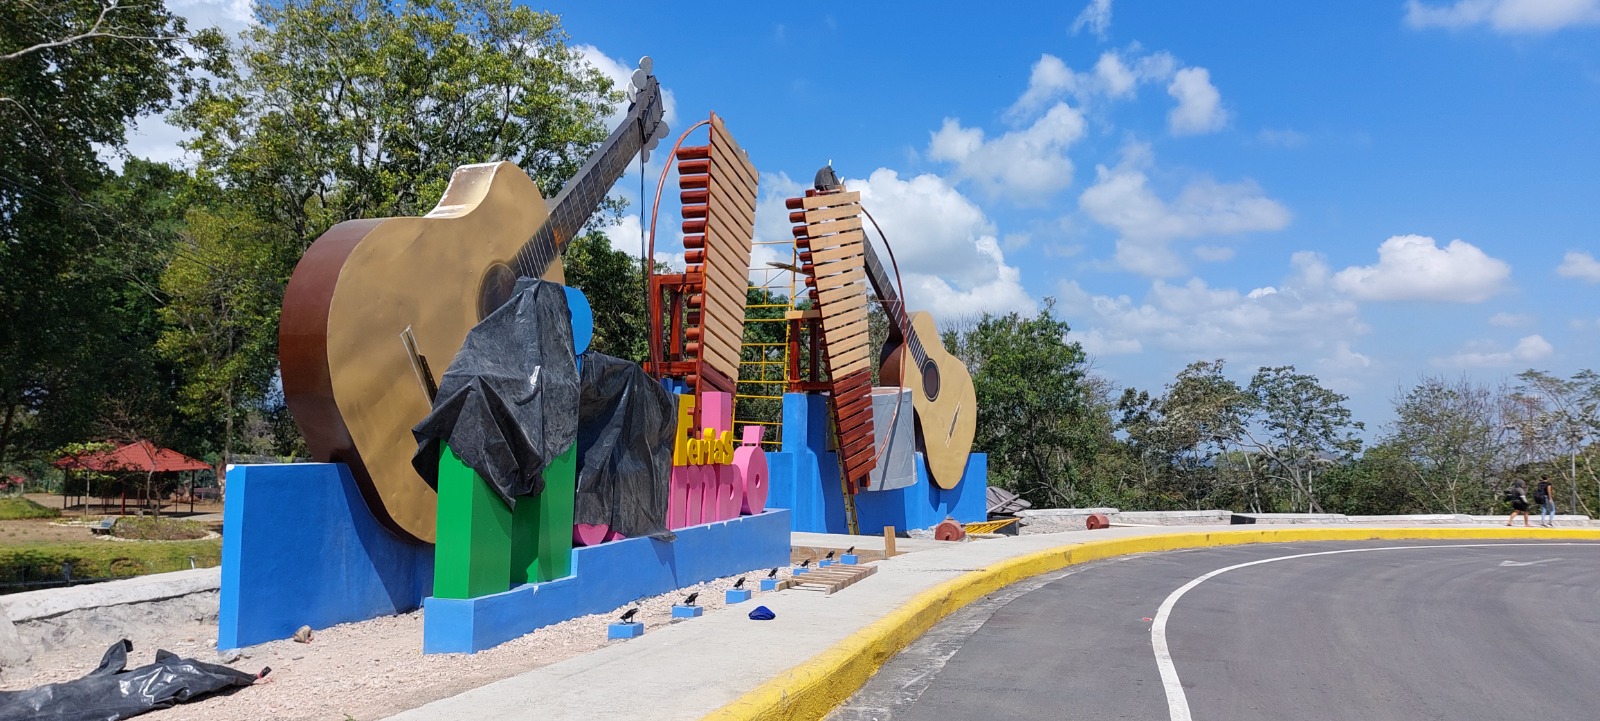 Mayor of Masaya in waste without reins: Build, throw away and rebuild a useless work